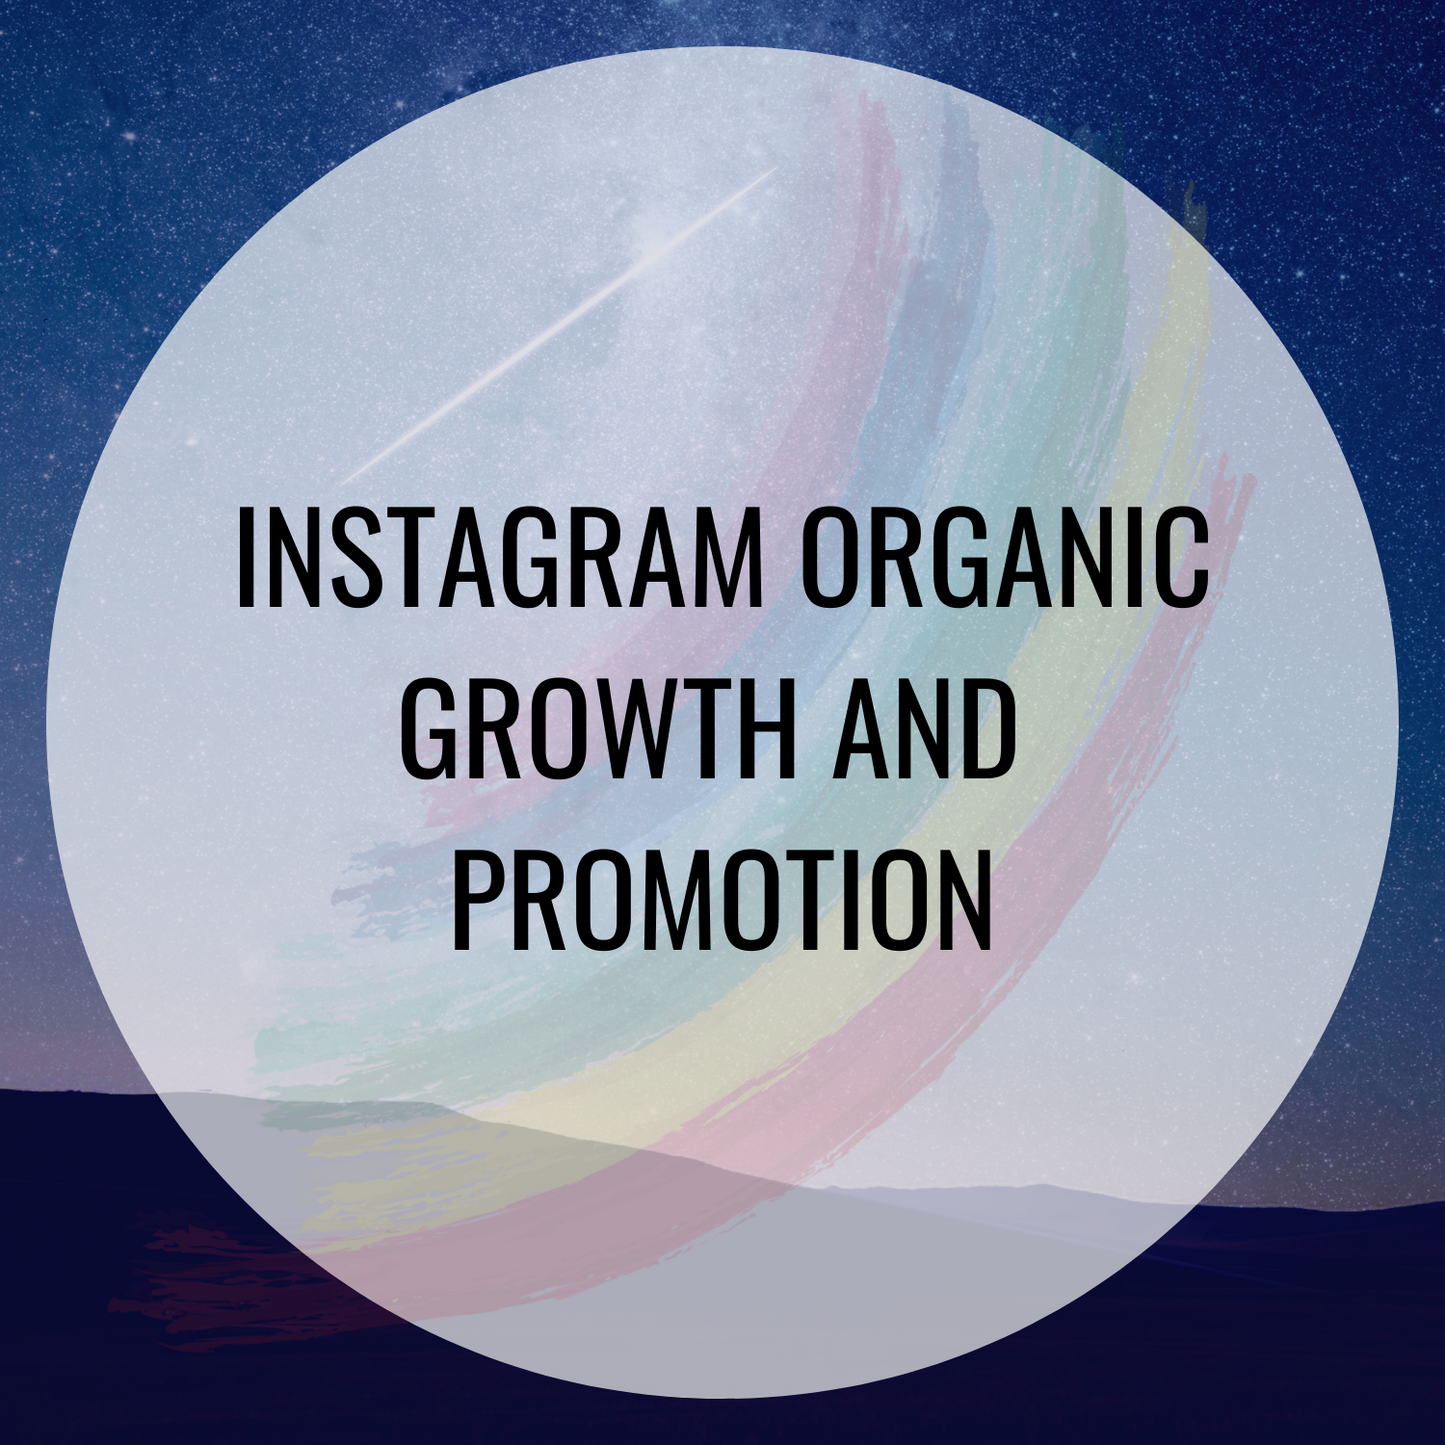 Instagram Organic Growth and Promotion